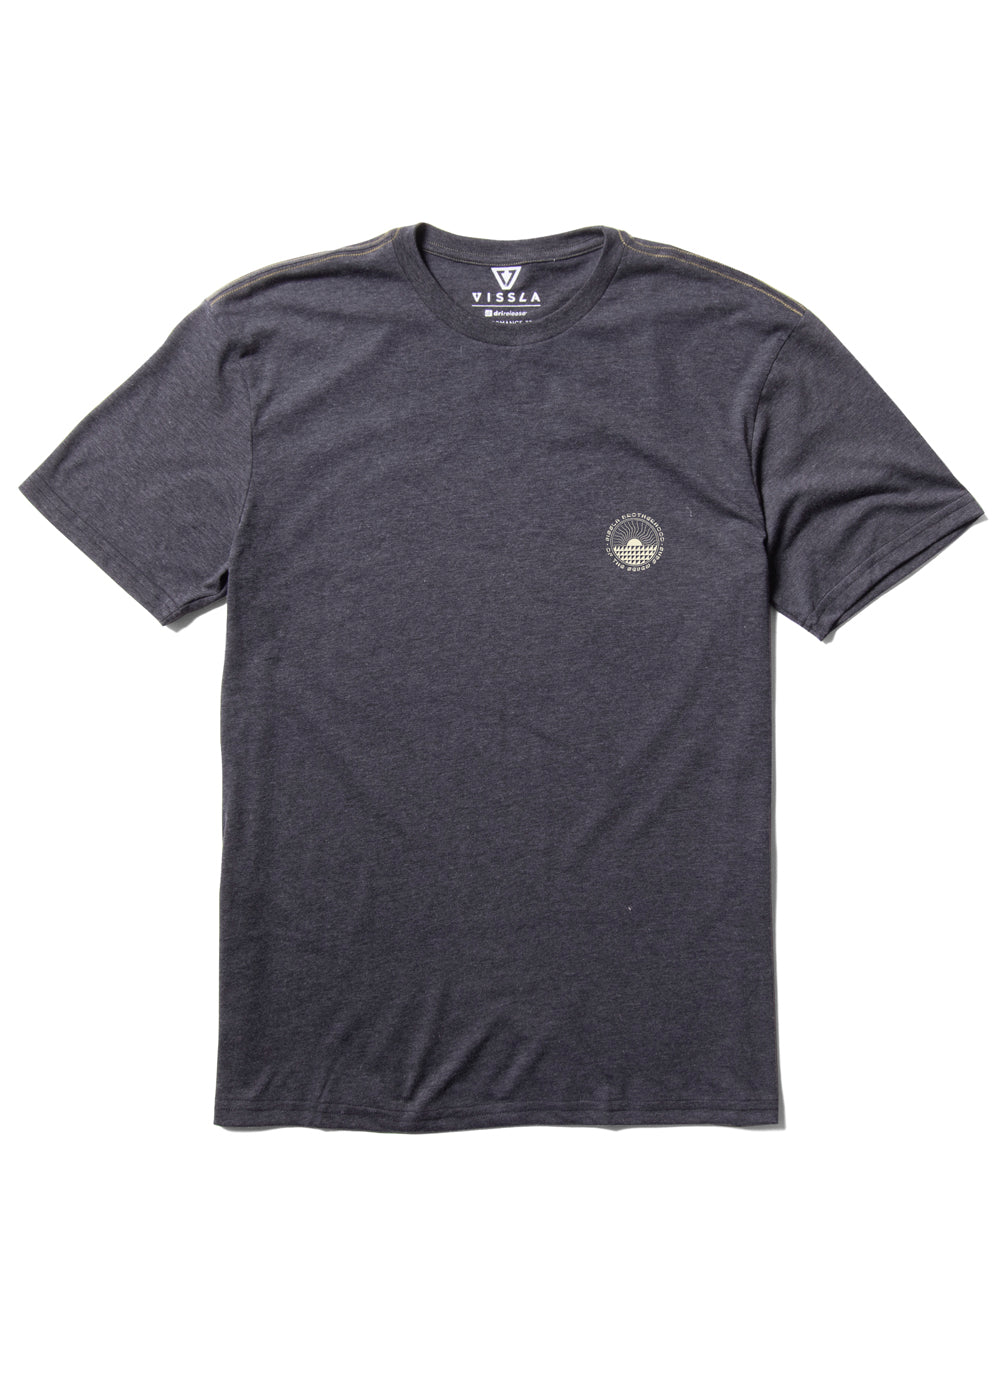 Fearless Performance T-shirt - Ultralight Breathable Tee - SNO